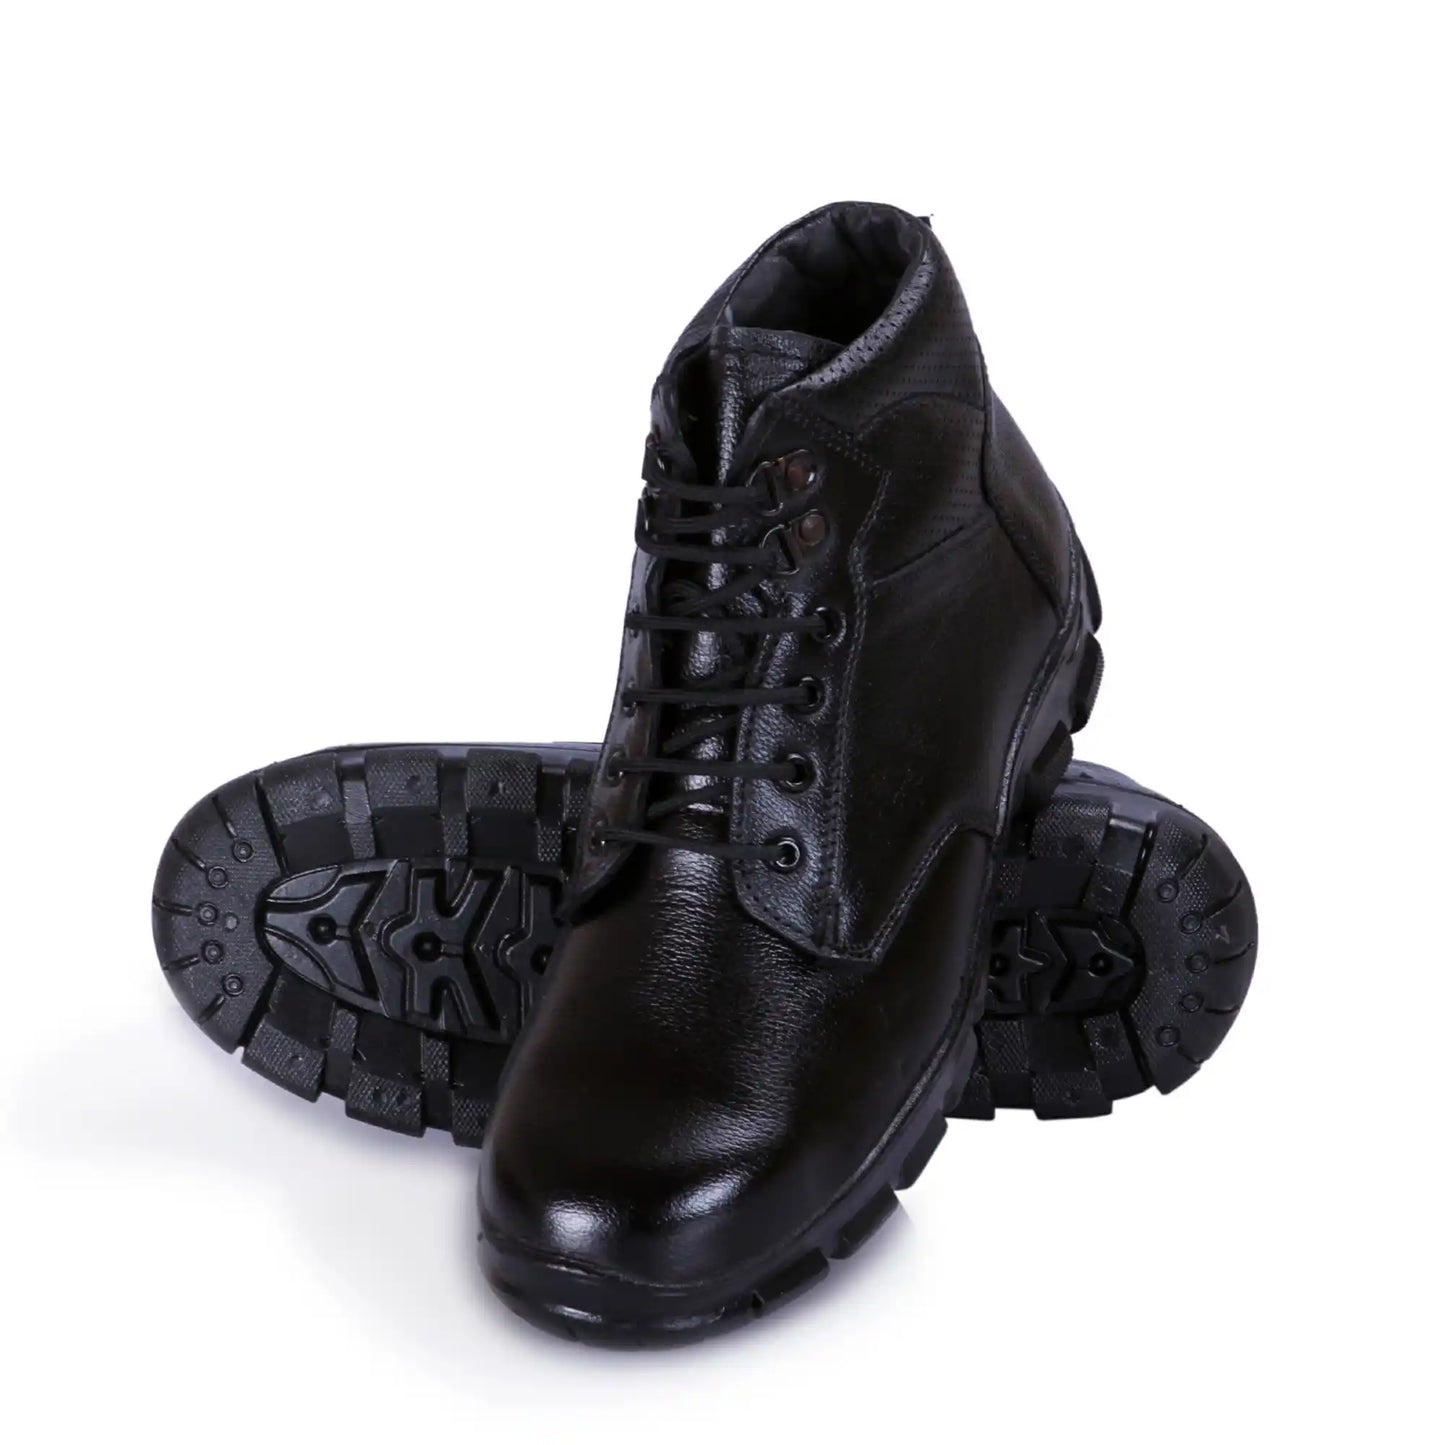 Pure Leather Safety Shoes Industrial Boots for Men